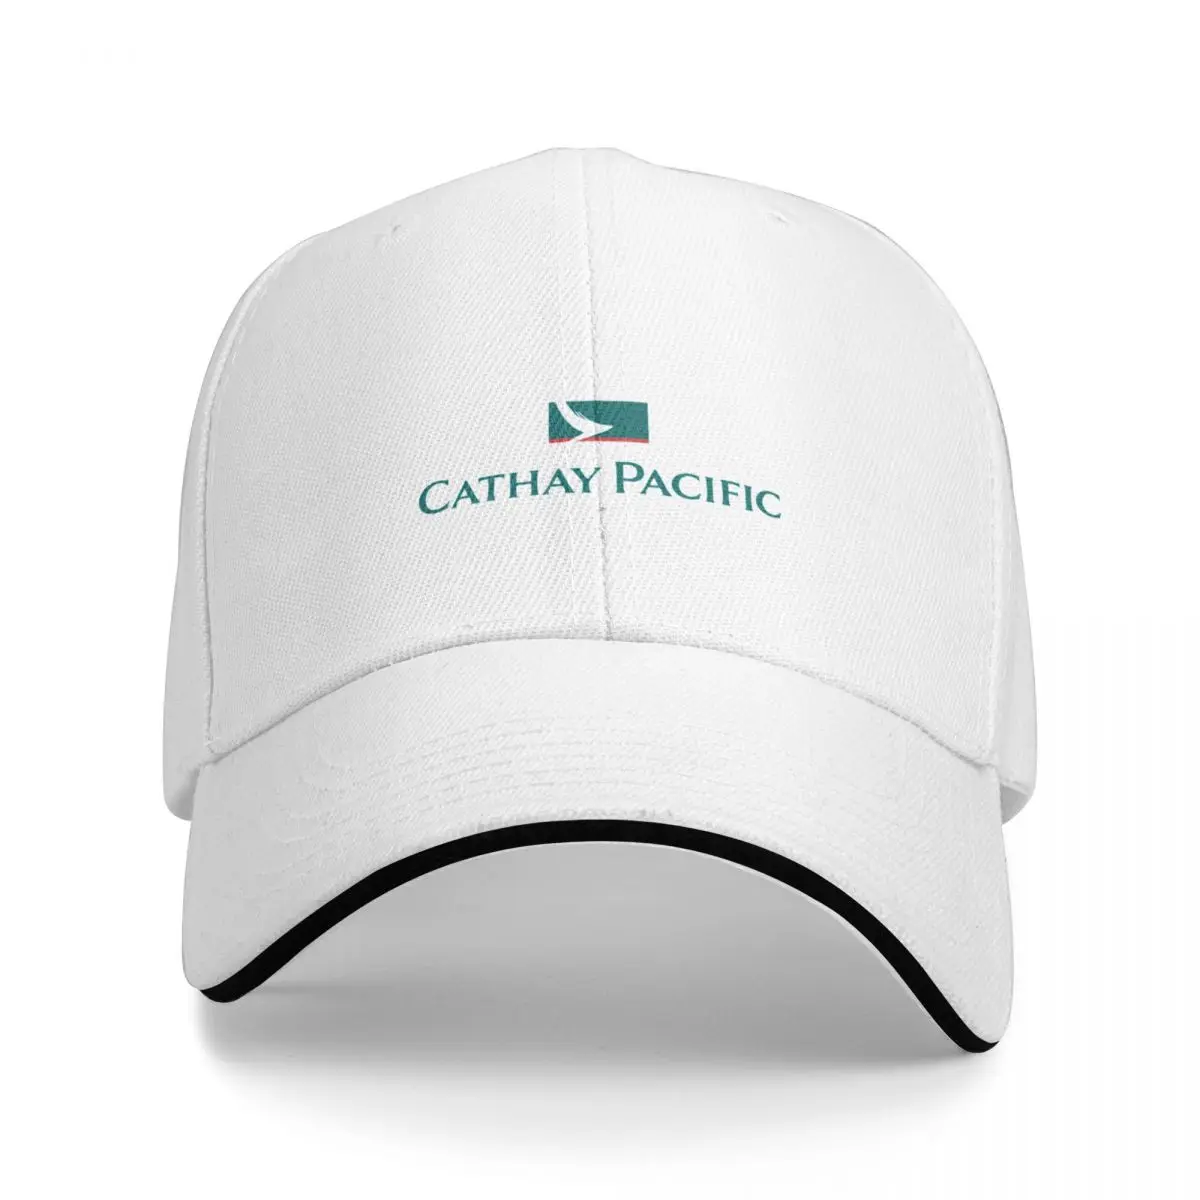 

Awesome Cathay Pacific Design Cap Baseball Cap military tactical caps new in hat trucker hats for men Women's